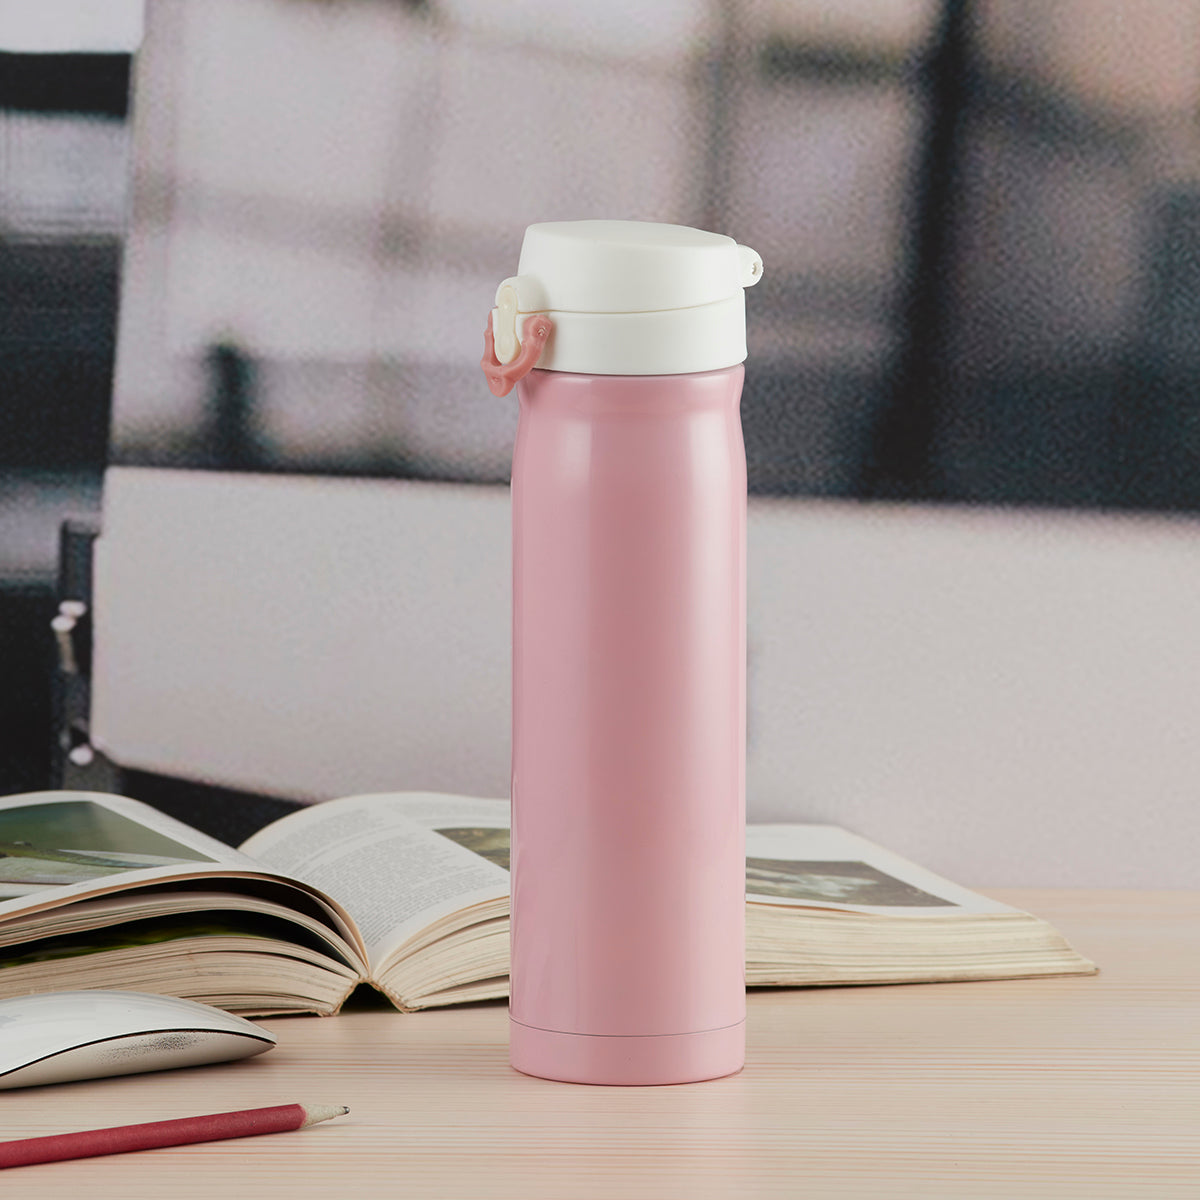 Stainless Steel Vacuum Insulated double wall Water Bottle - 500ml (ART01672)